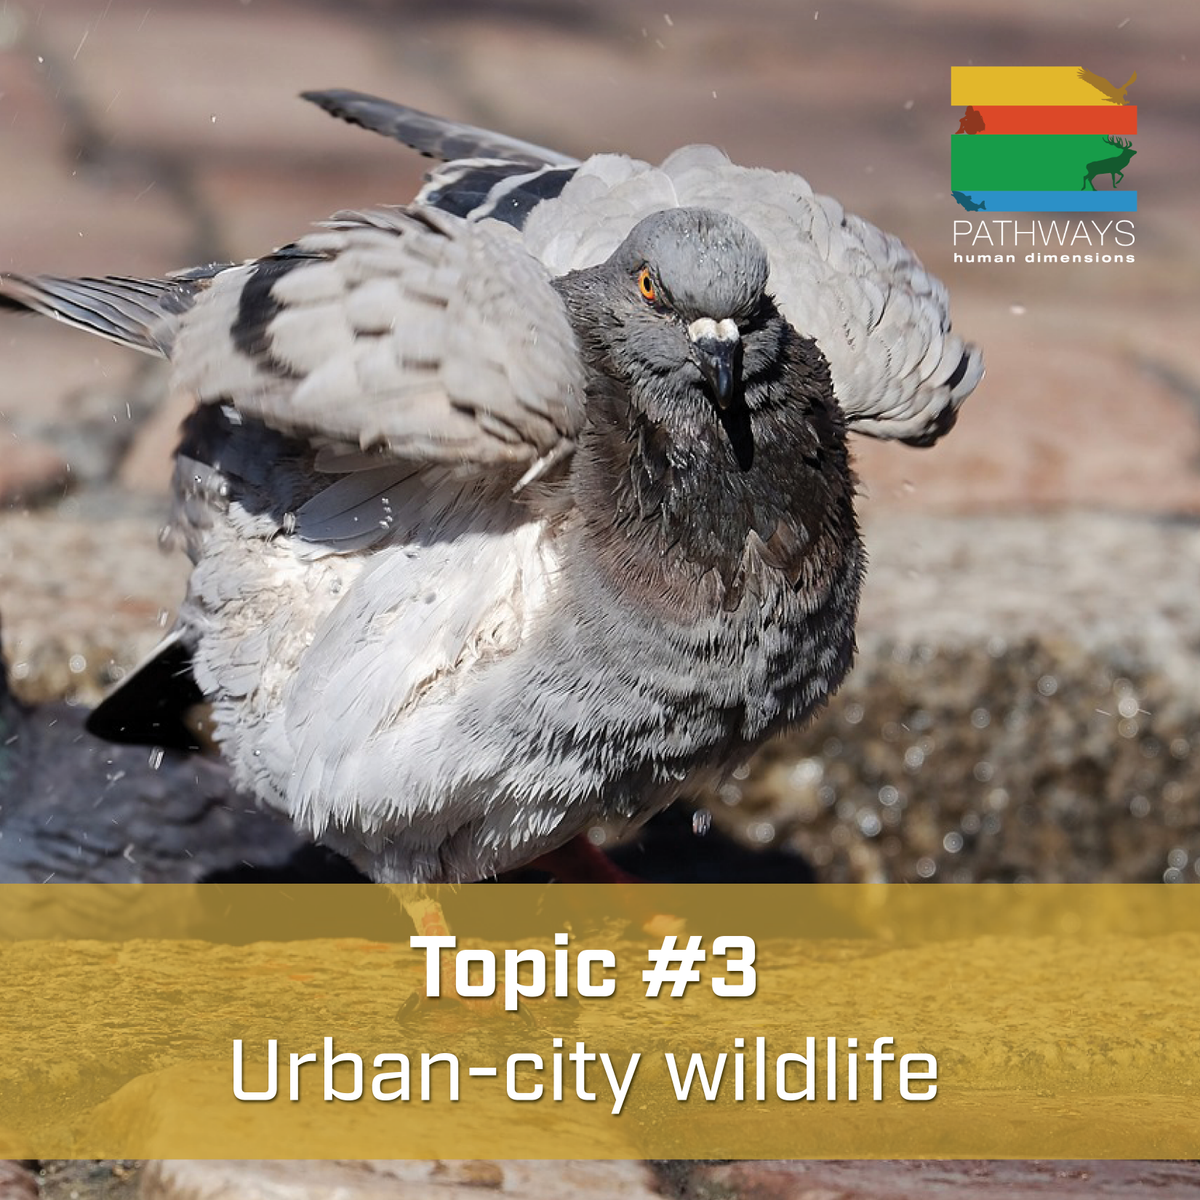 Alongside our theme, we have several topics of interest for Pathways Europe 2024. The third topic is urban-city wildlife. We look forward to your research on this topic and hope to see some new perspectives at the conference! - via #Whova Event Platform